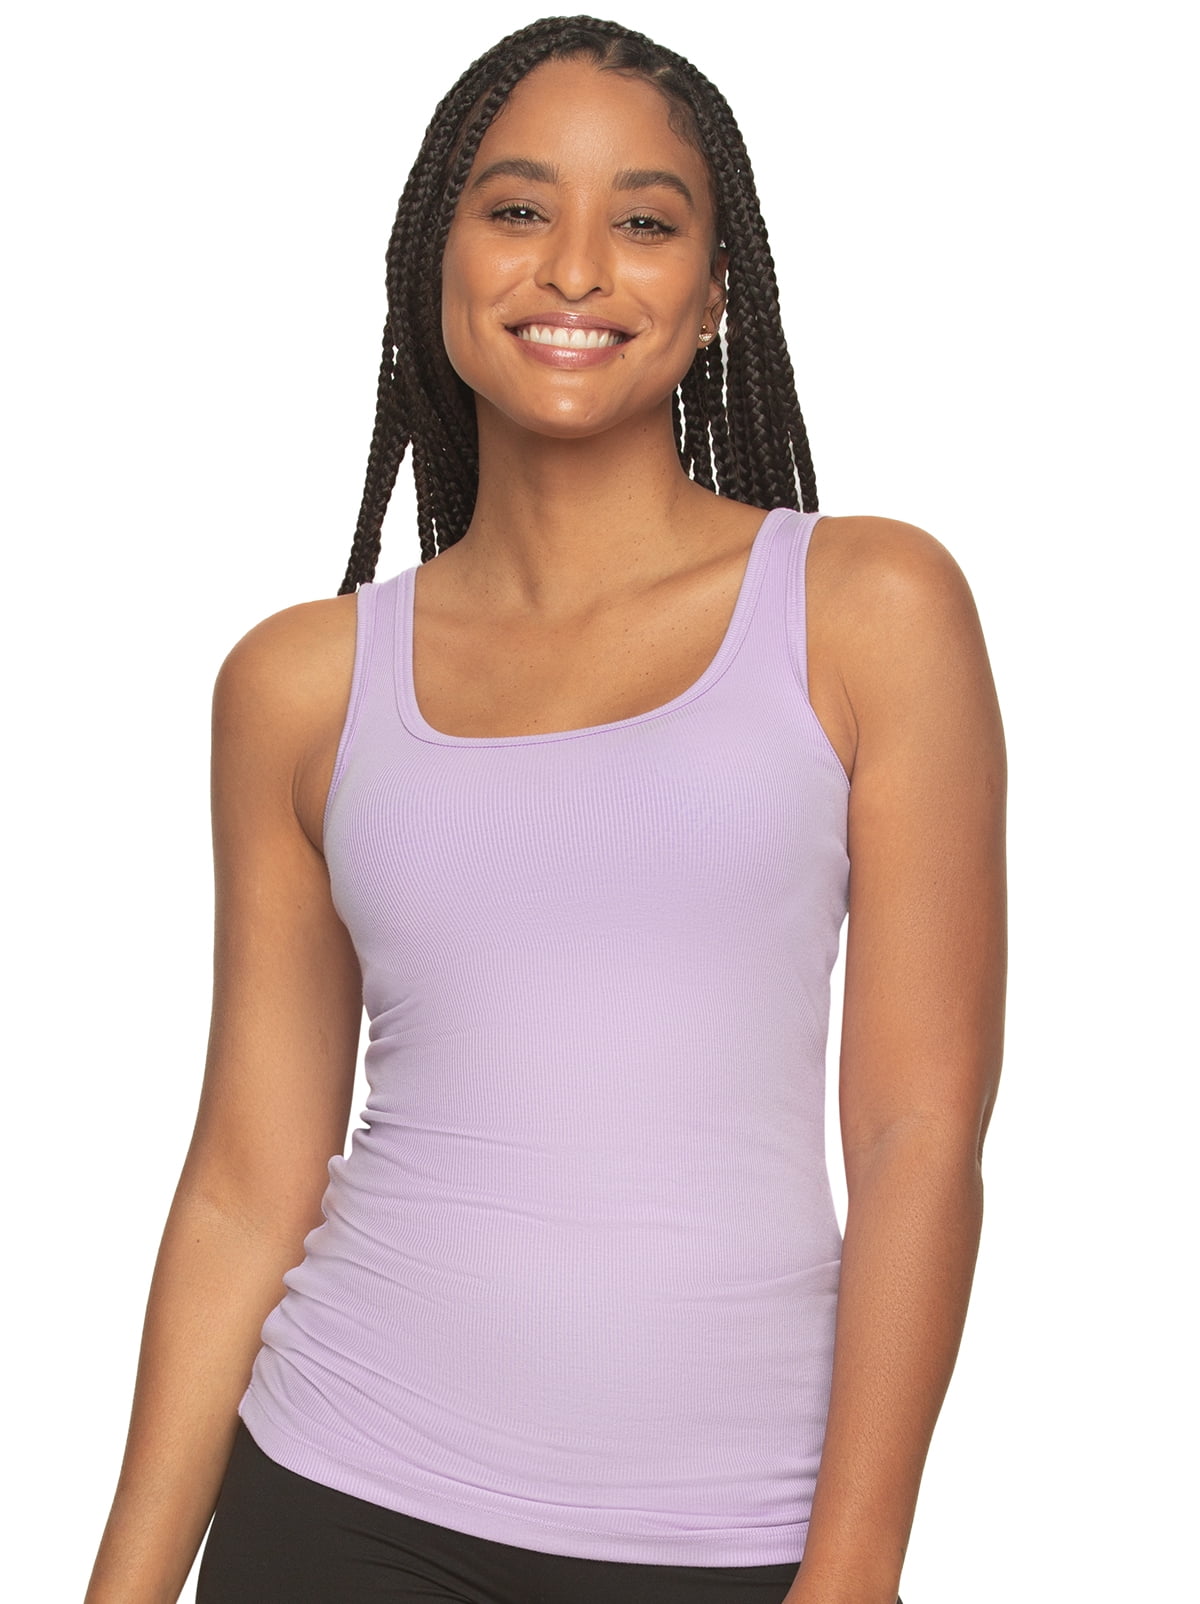 Felina Cotton Ribbed Tank Top - Class Tank Top for Women, Workout Tank Top  For Women (Color Options Available) (Purple Rose, X-Large) 